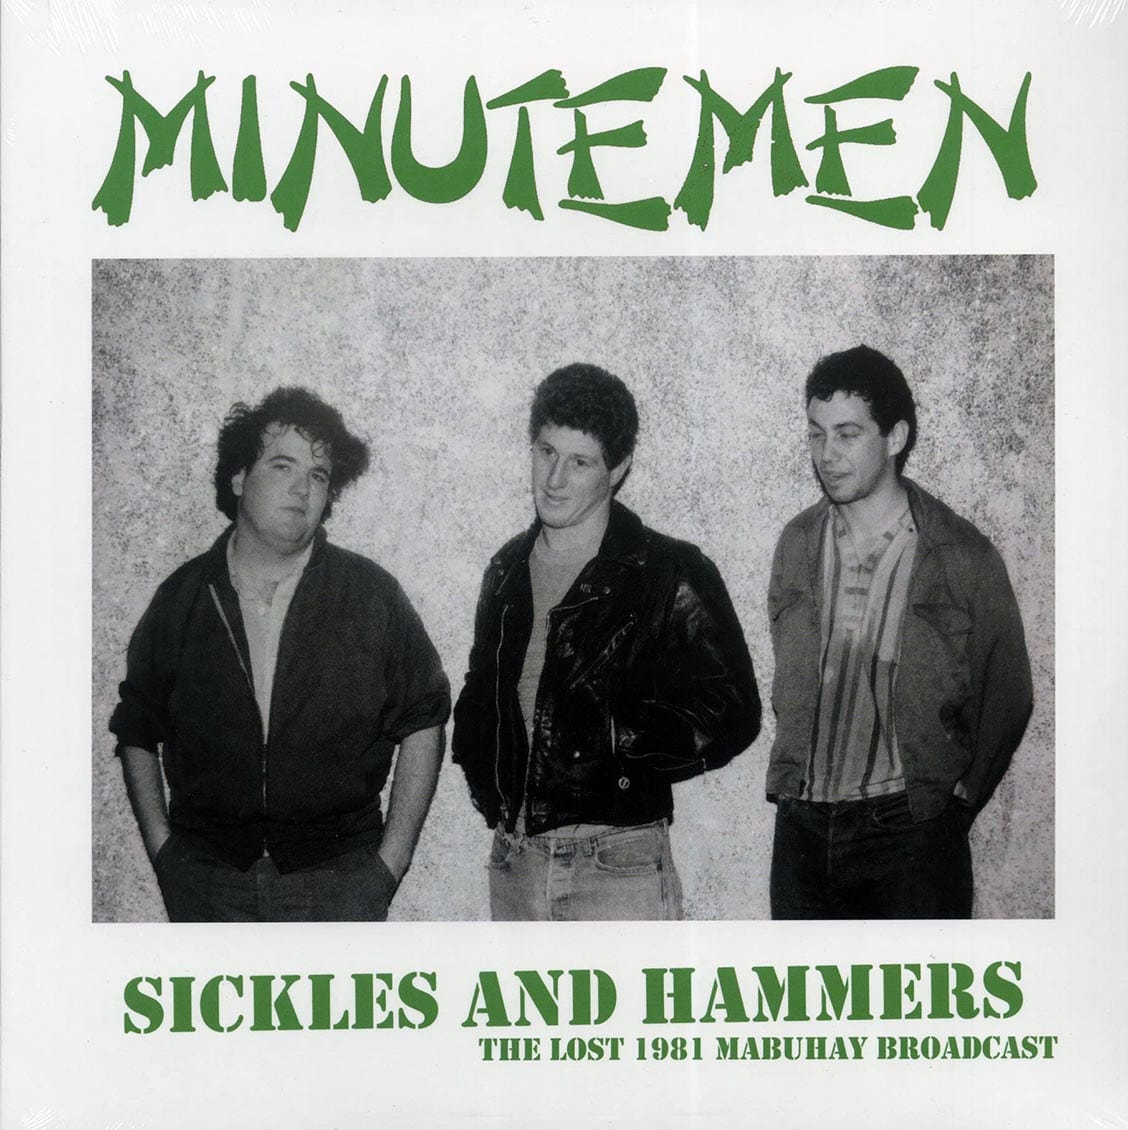 MINUTEMEN: Sickles and Hammers • The Lost 1981 Mabuhay Broadcast LP (limited to 500 copies)